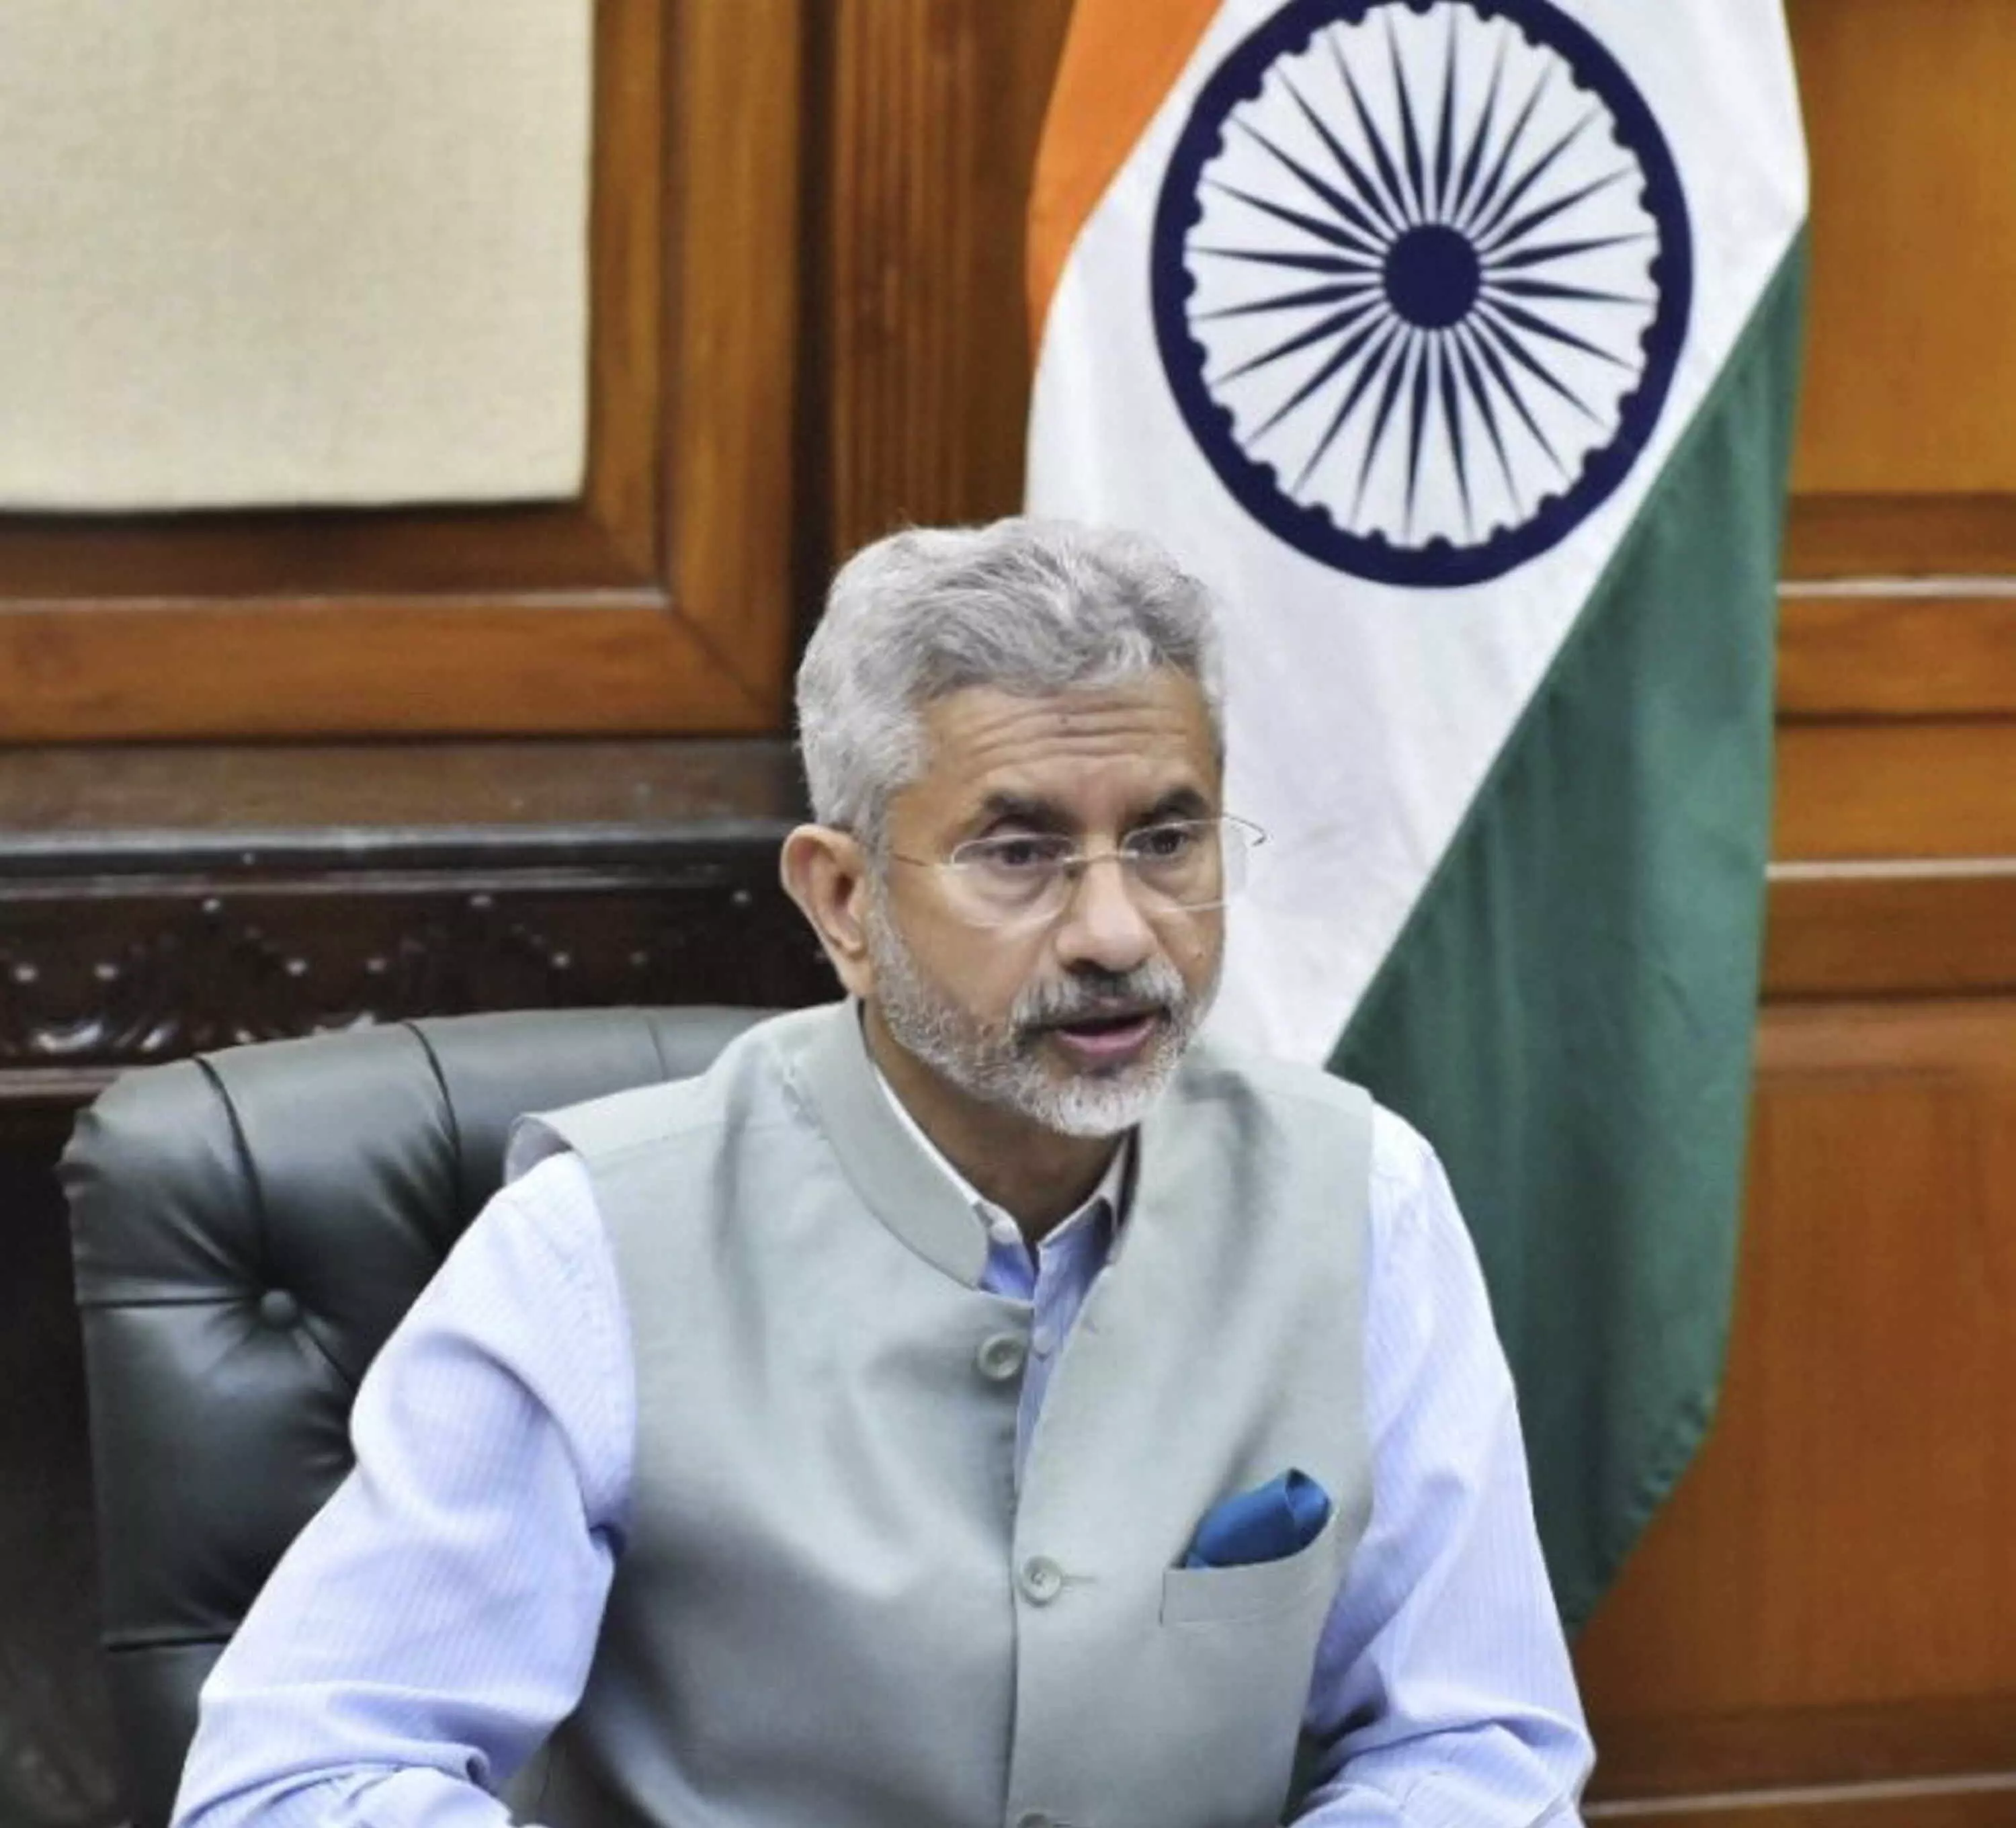 Data privacy, security challenges of digital world, G20 meet expected to address them: Jaishankar